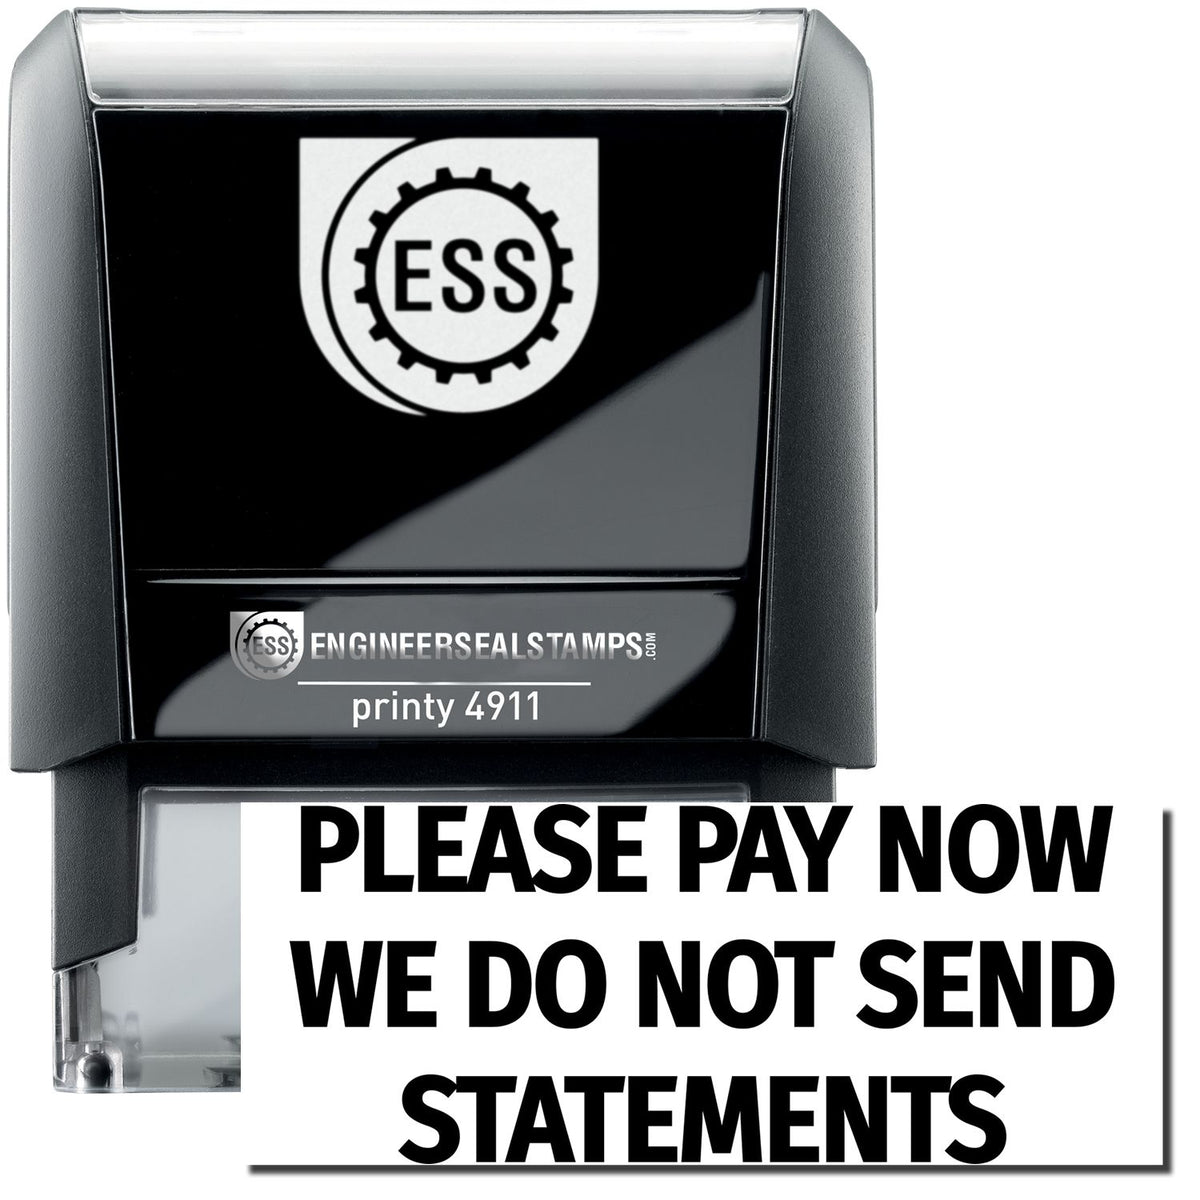 A self-inking stamp with a stamped image showing how the text &quot;PLEASE PAY NOW WE DO NOT SEND STATEMENTS&quot; is displayed after stamping.